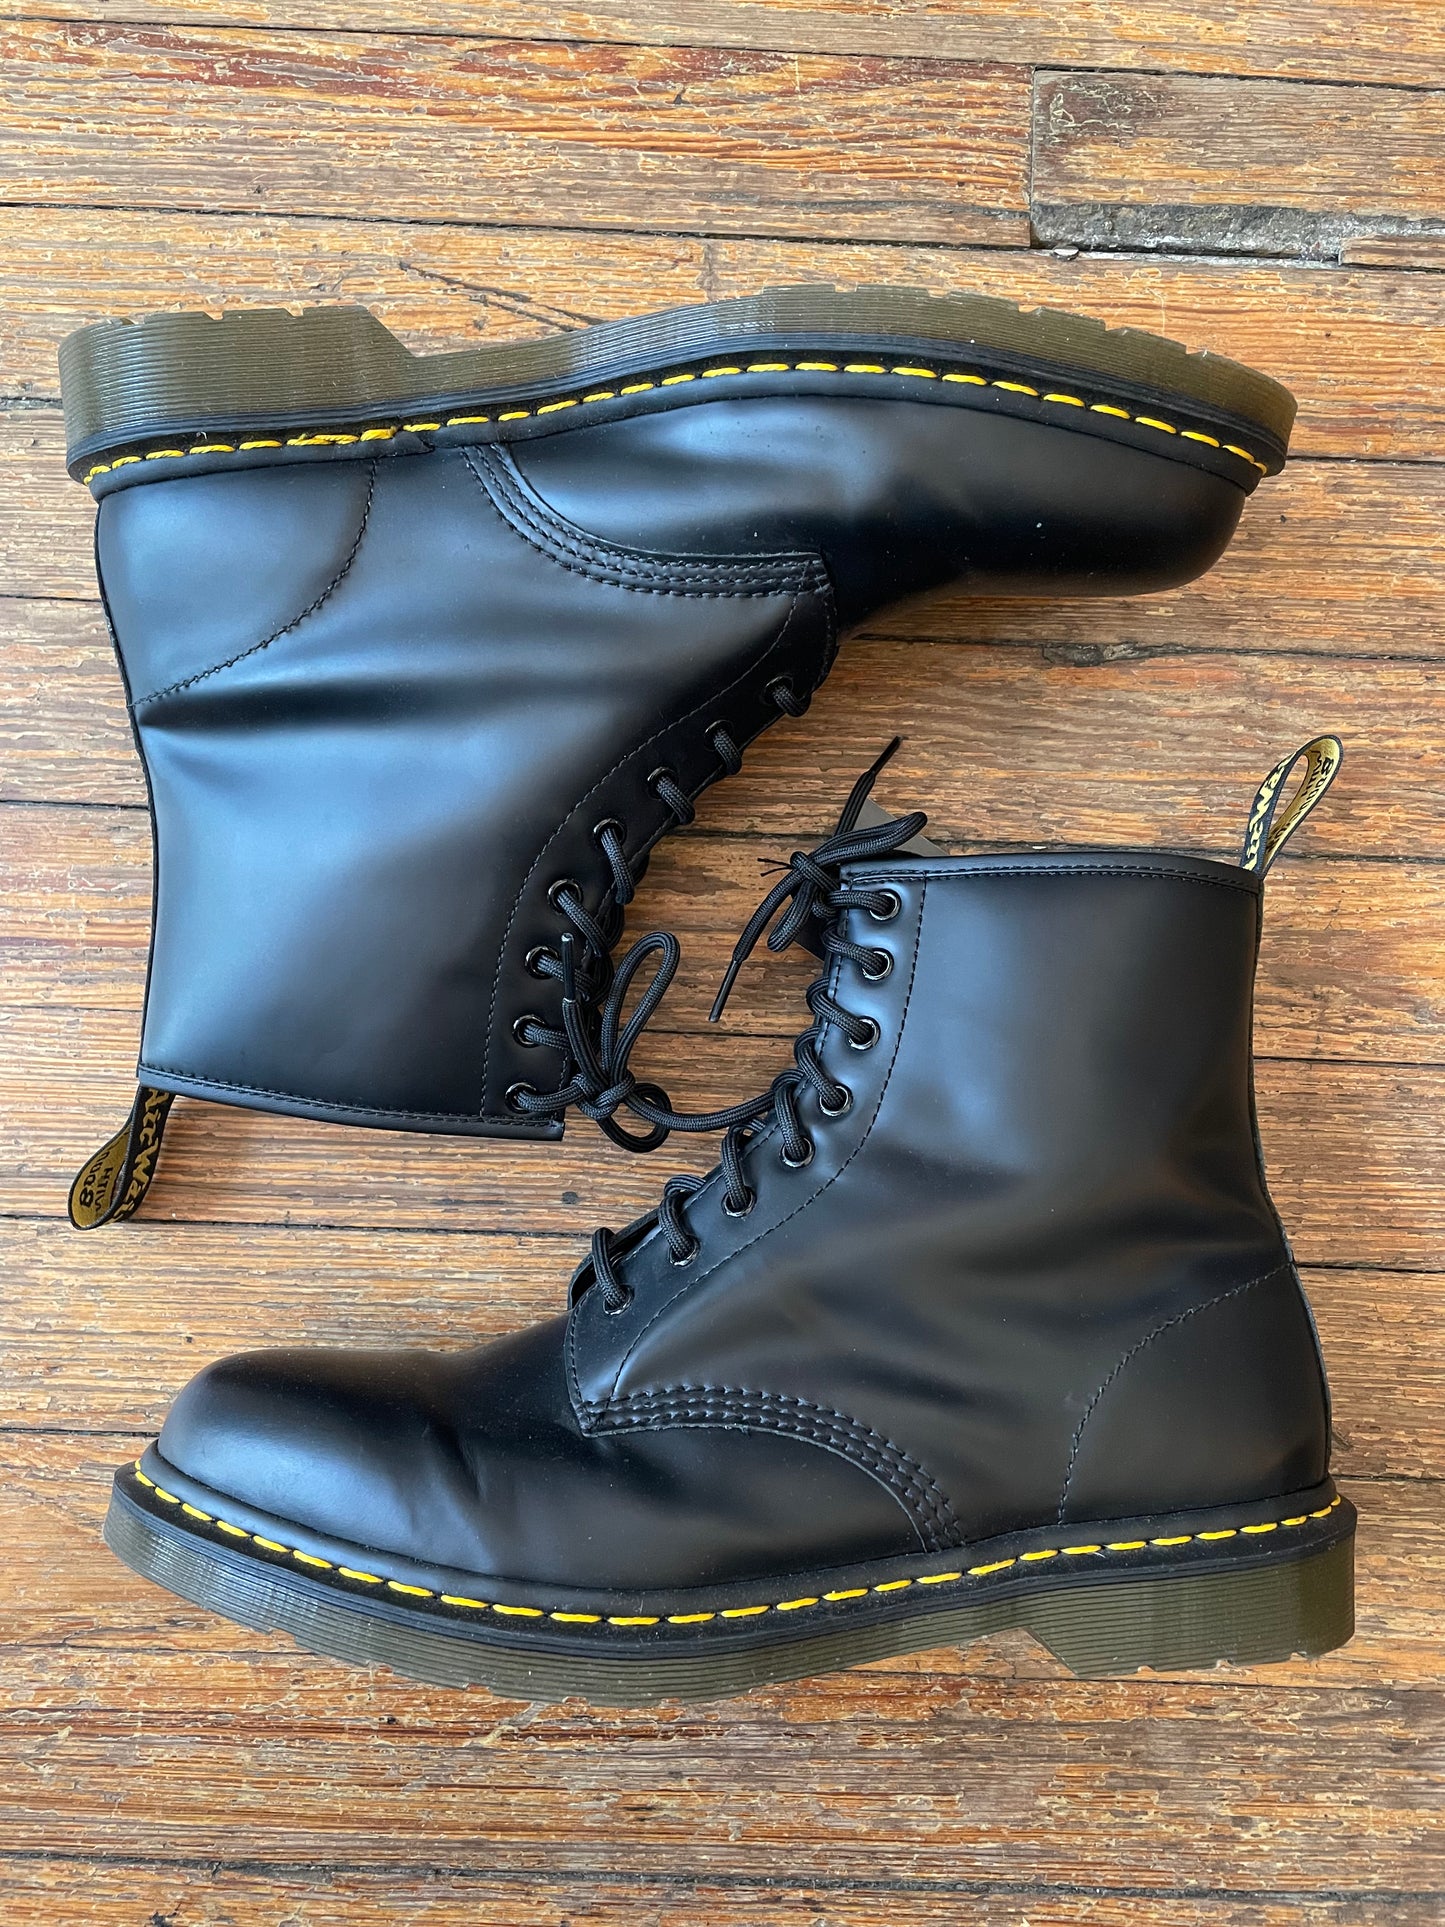 Classic Dr. Martens Black 8 Eyelet Smooth Combat Boots